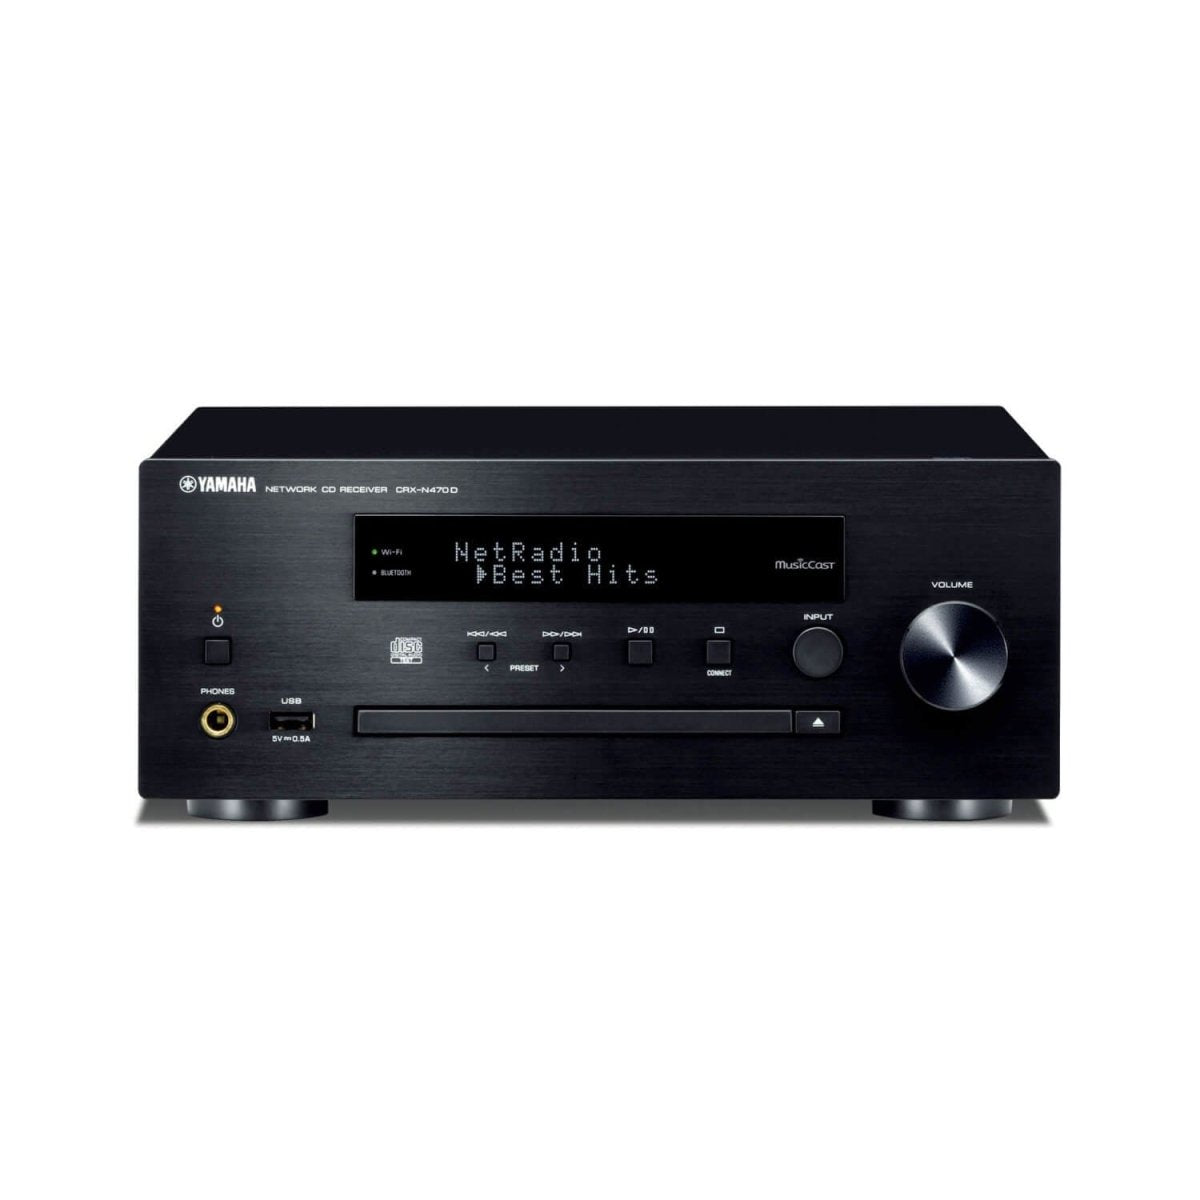 Yamaha CRXN470D MusicCast Networked CD Receiver with DAB-FM radio - Black - Atlantic Electrics